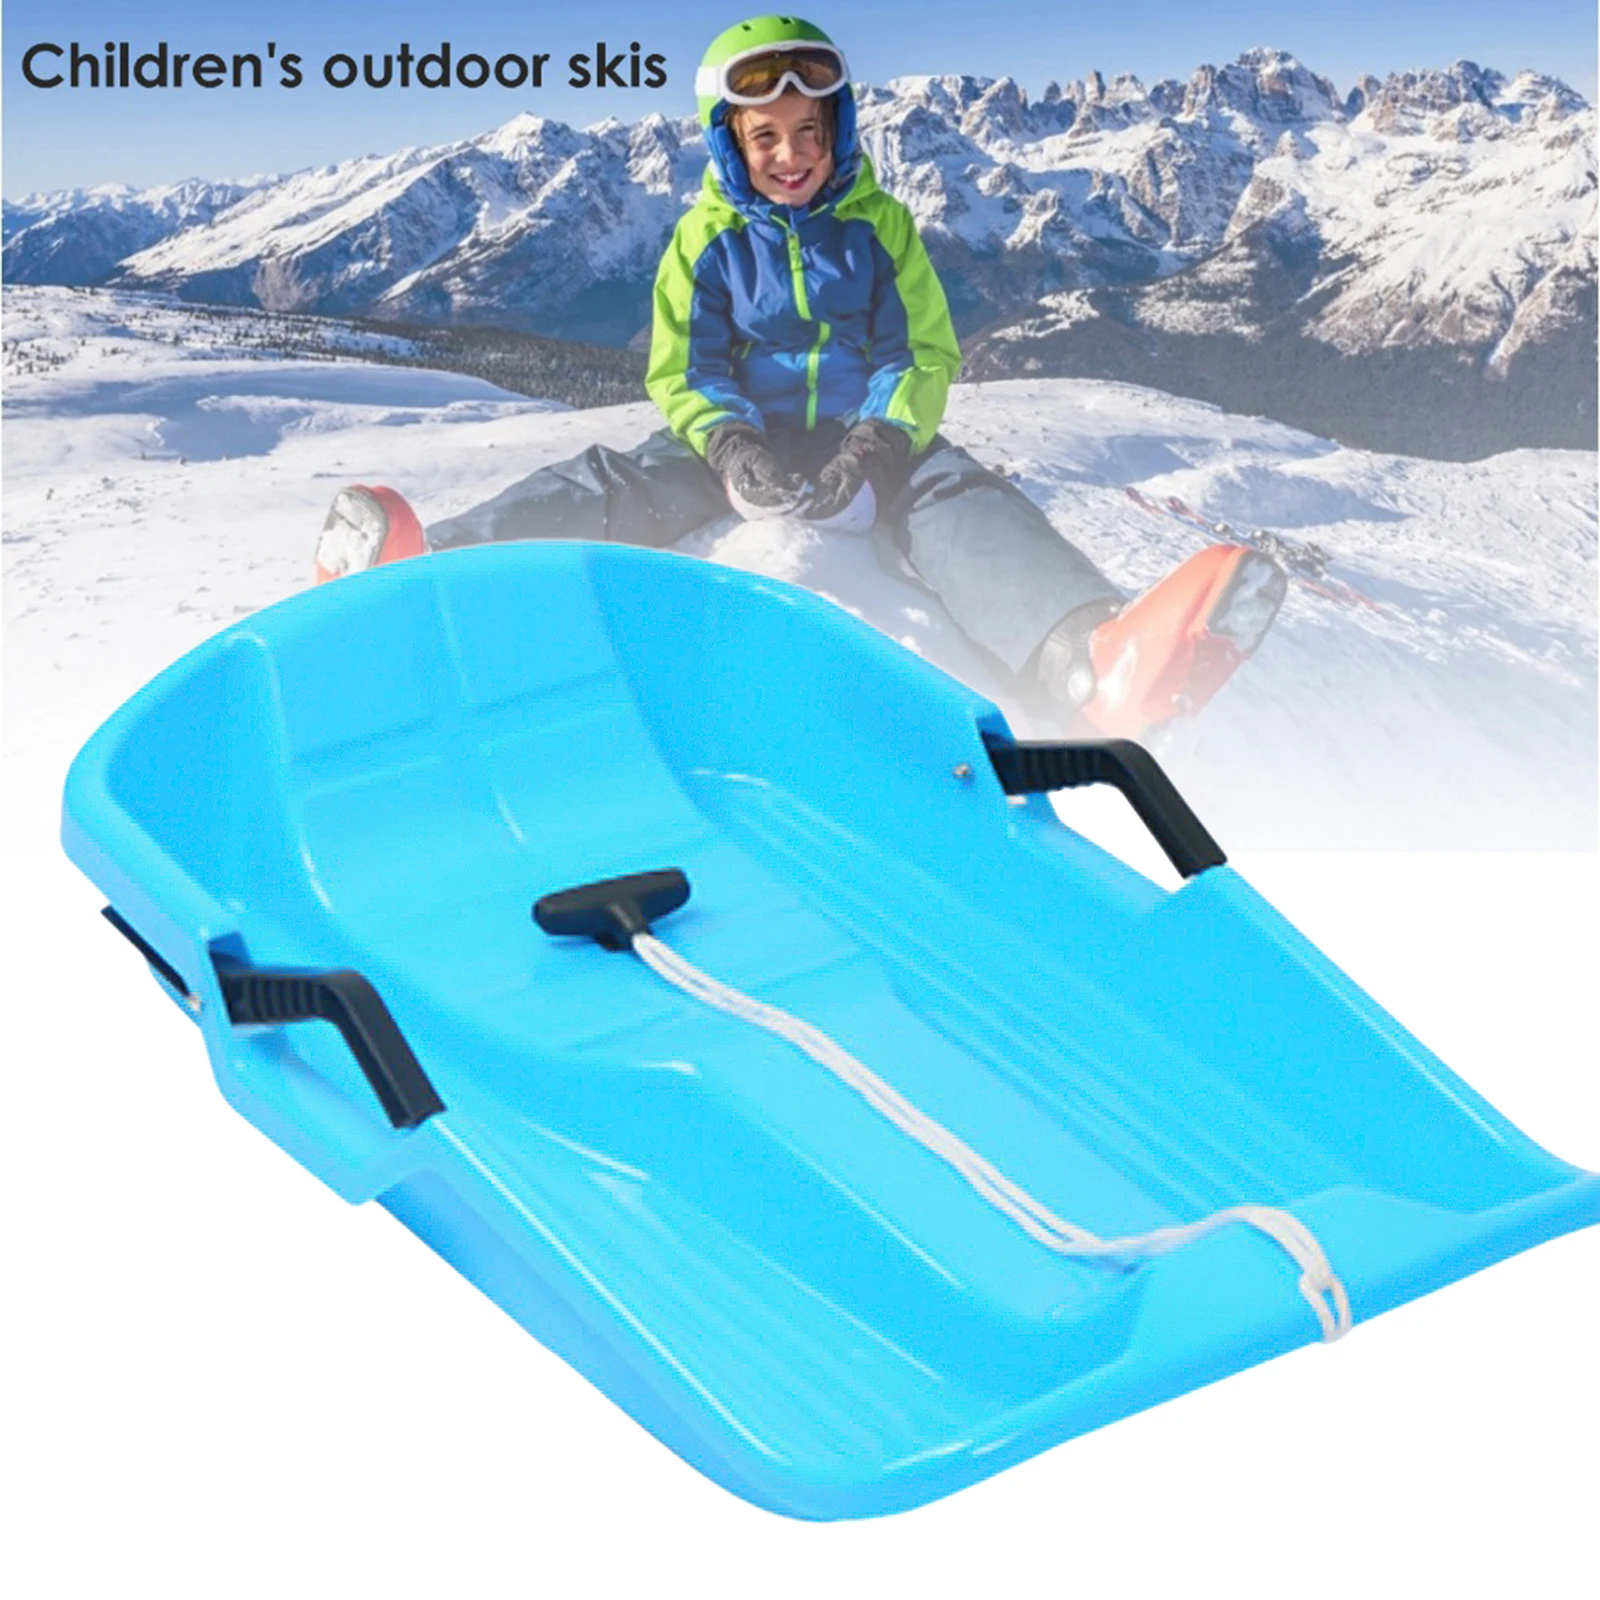 Ropes Excluded Blue, Medium, 36 1 Pack Kid and Adult Winter Fun Superio Toboggan Snow Sled for Kids and Adults Heavy Duty Plastic Slider for 2 Riders with Handles and Hole for Pull Ropes- 